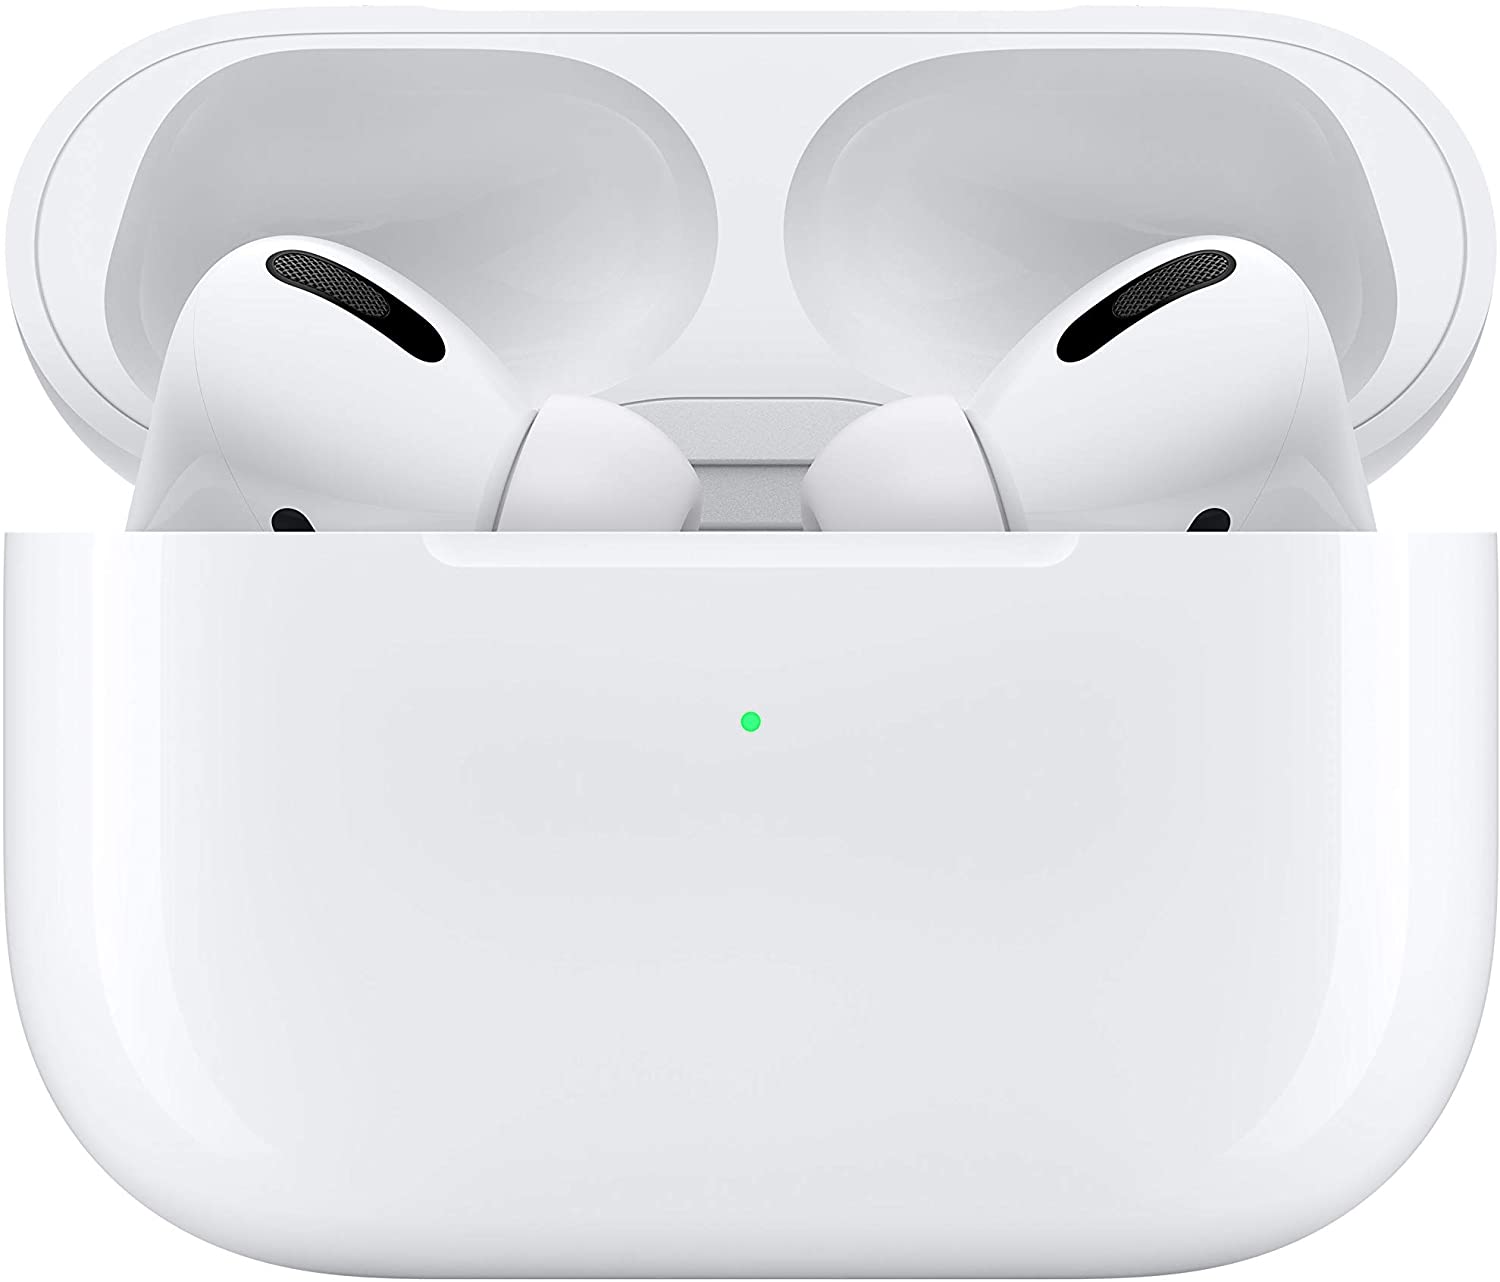 Grab Apple's AirPods Pro for $75 off at Amazon (or Beats Studio